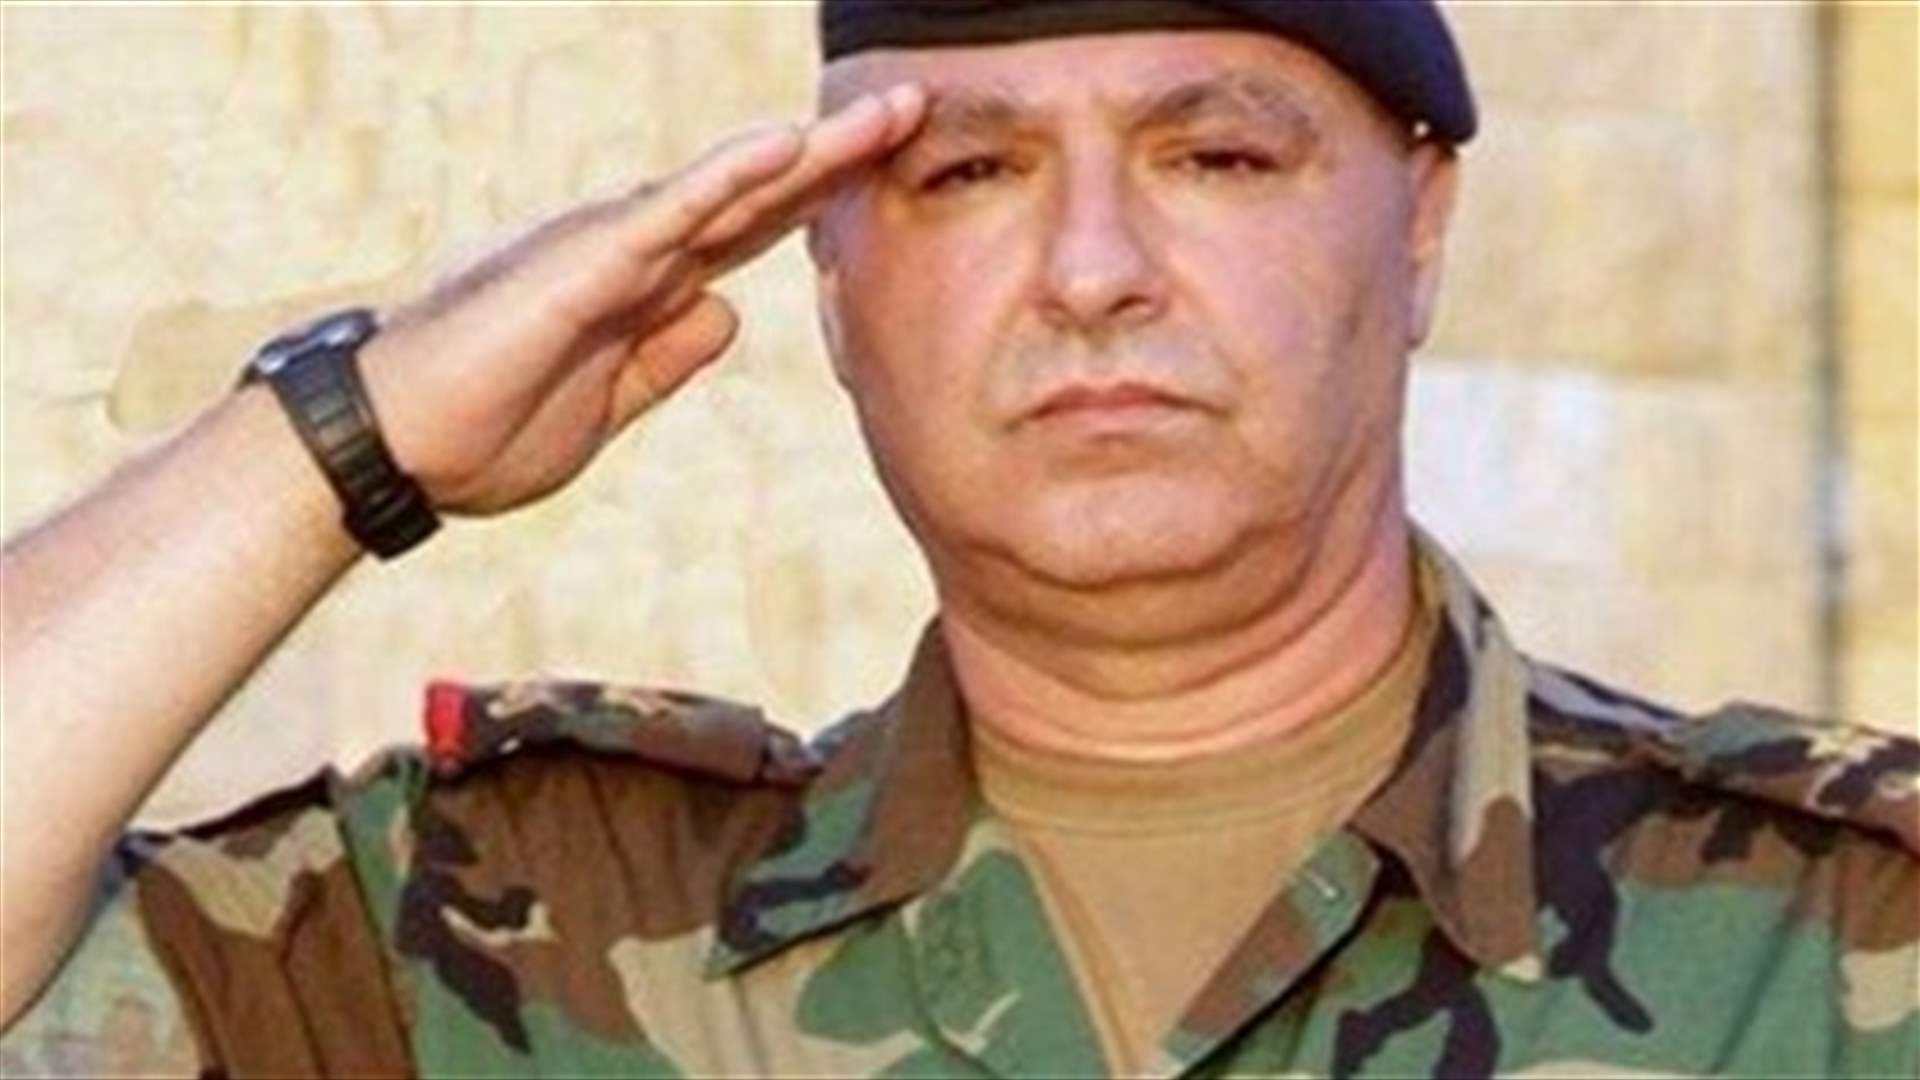 LAF Commander Aoun offers condolences on death of soldier in Ras Baalbek